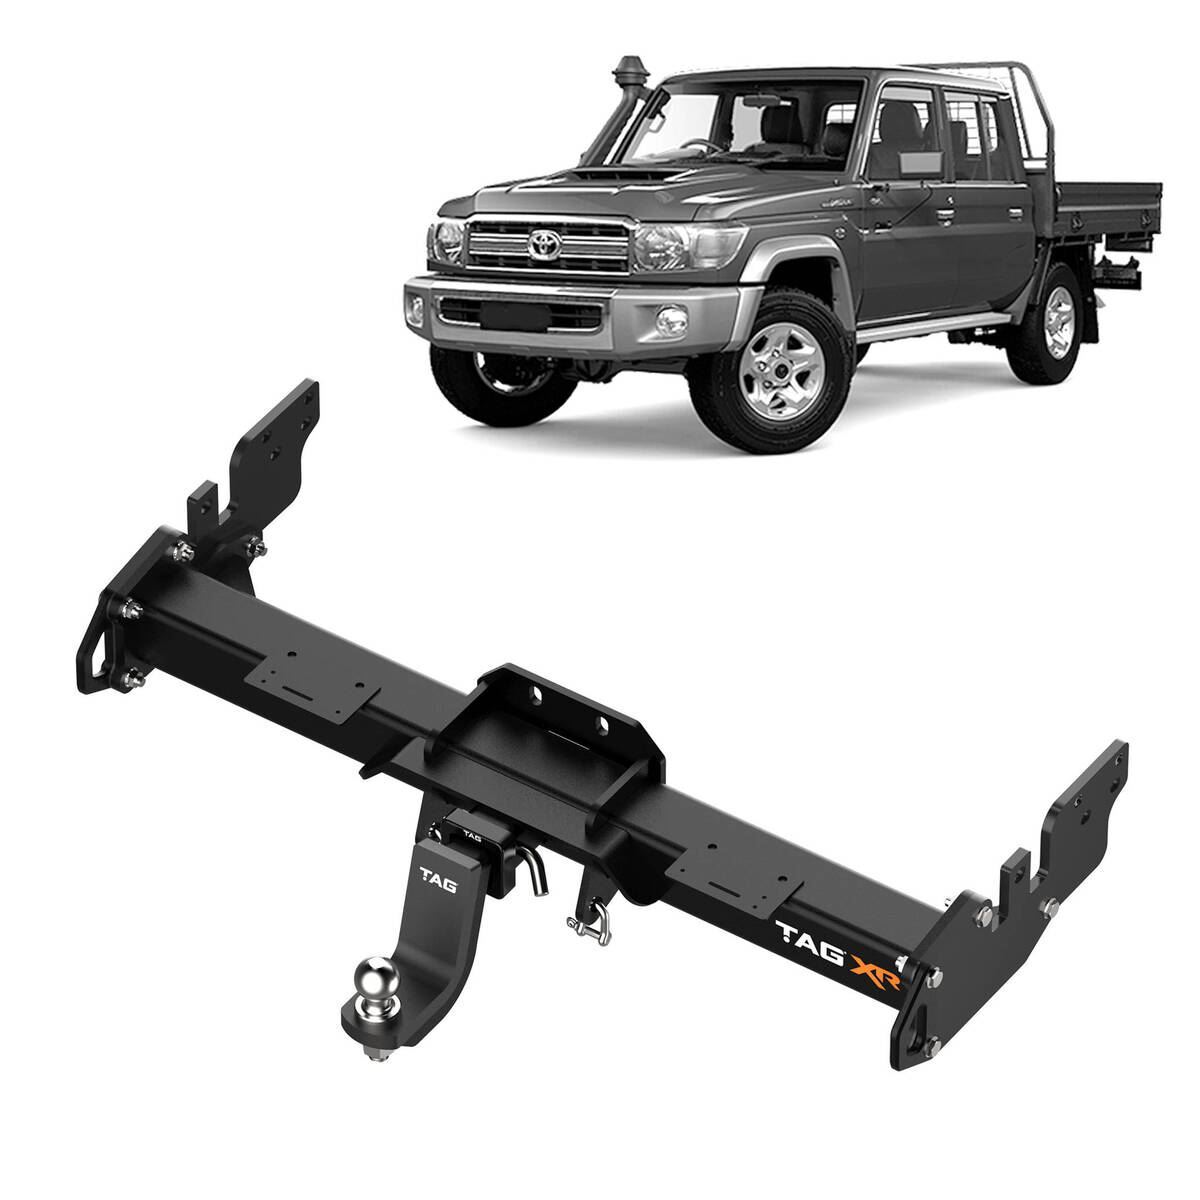  Rod Hauler Fishing Rod Holder For Pickup Trucks. Holds Up To 4 Fishing  Rods At A Time. Includes 2 Soft Straps to Attach to Your Tailgate. : Sports  & Outdoors